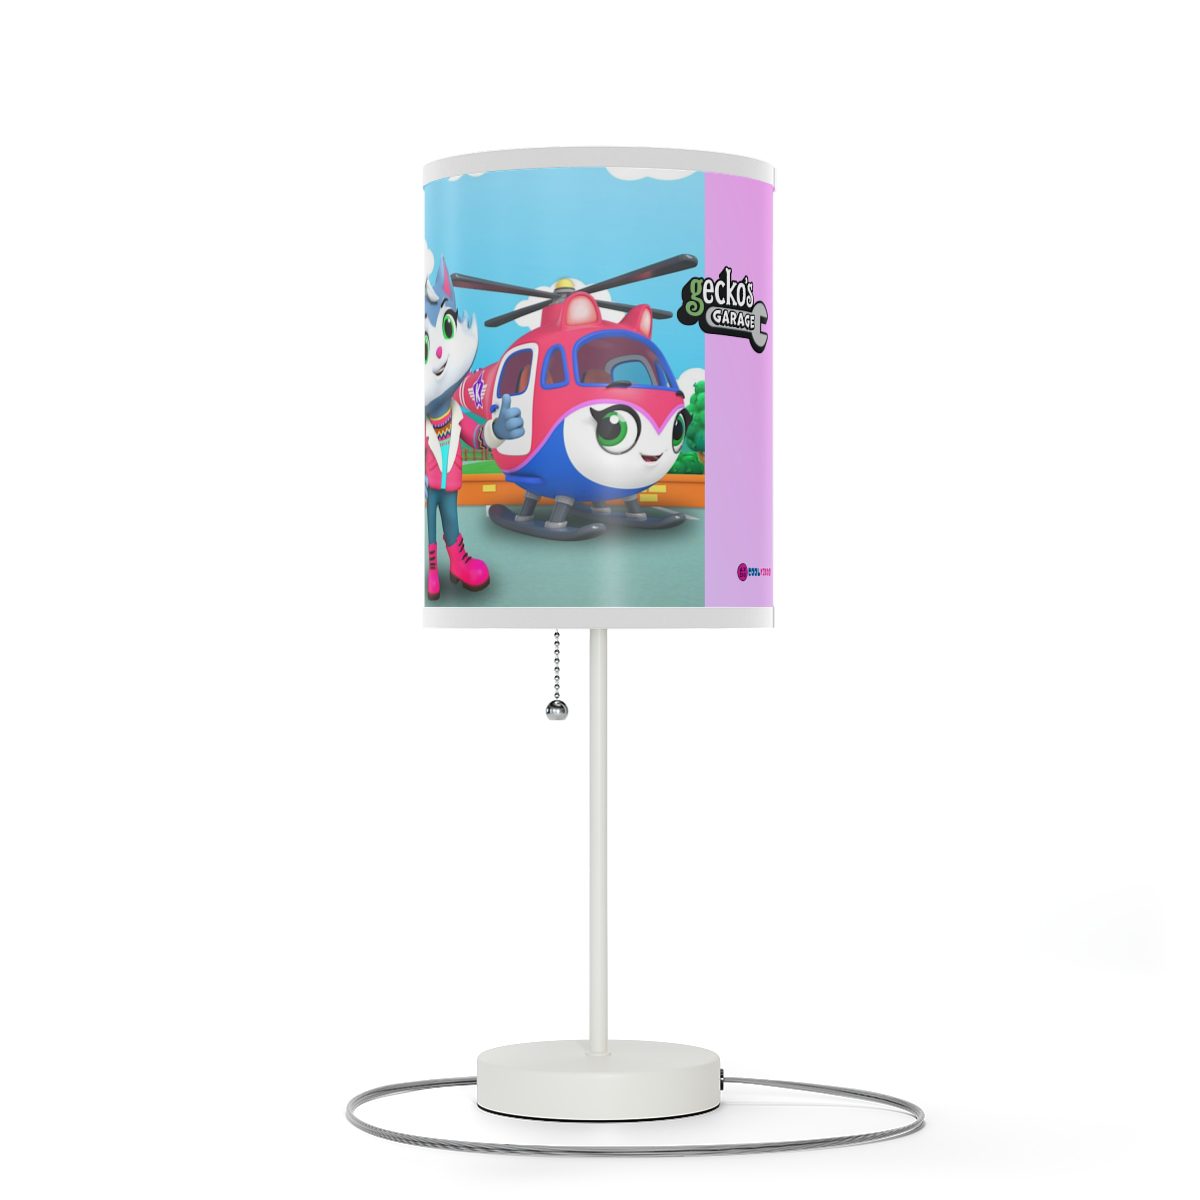 Gecko’s Garage Main Characters Lamp on a Stand Cool Kiddo 16